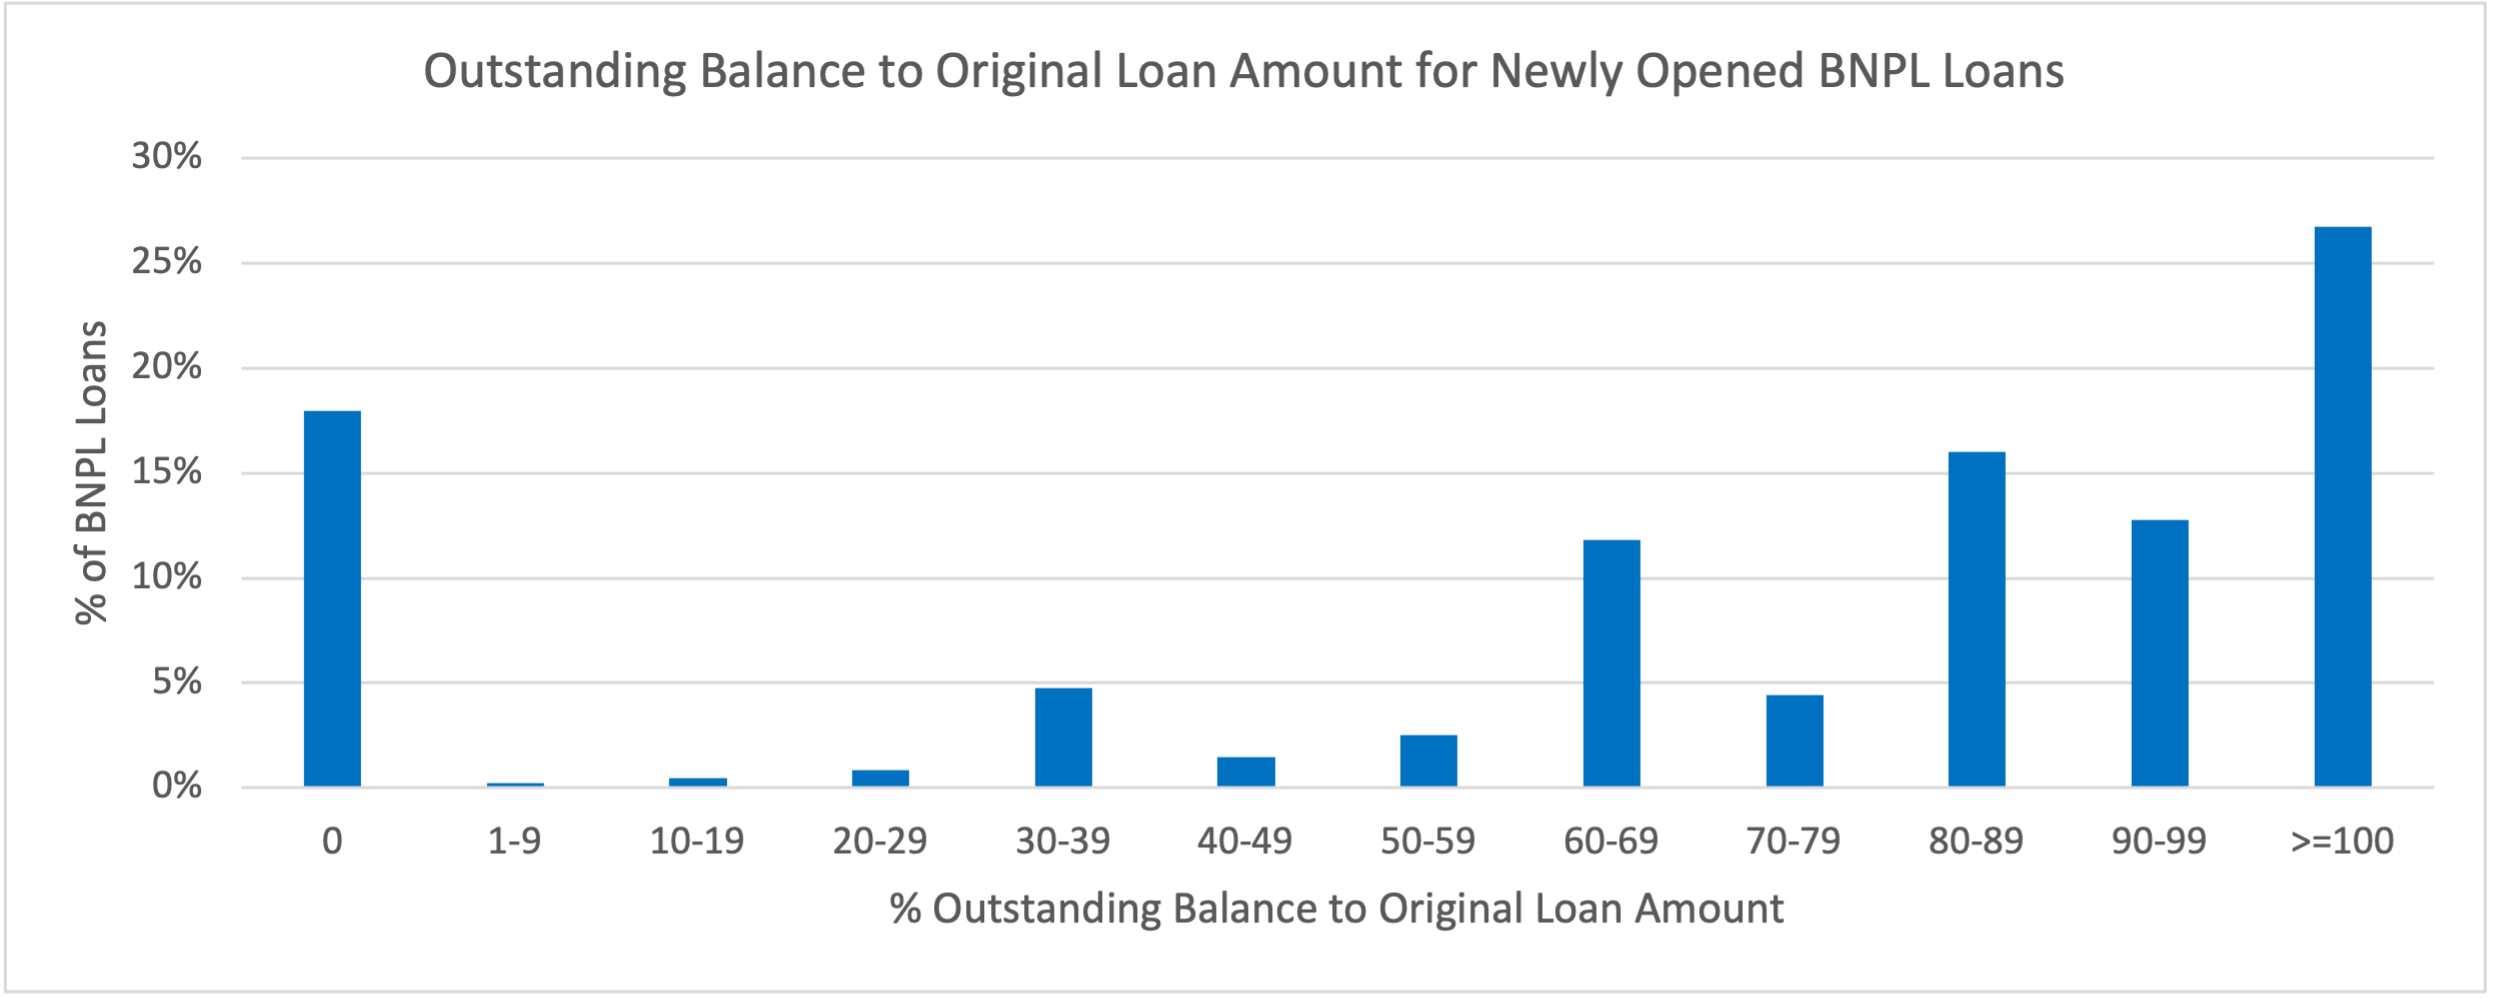 Figure 2: Majority of the BNPL Loans Have a High Ratio of Outstanding Balance to Original Loan Amount